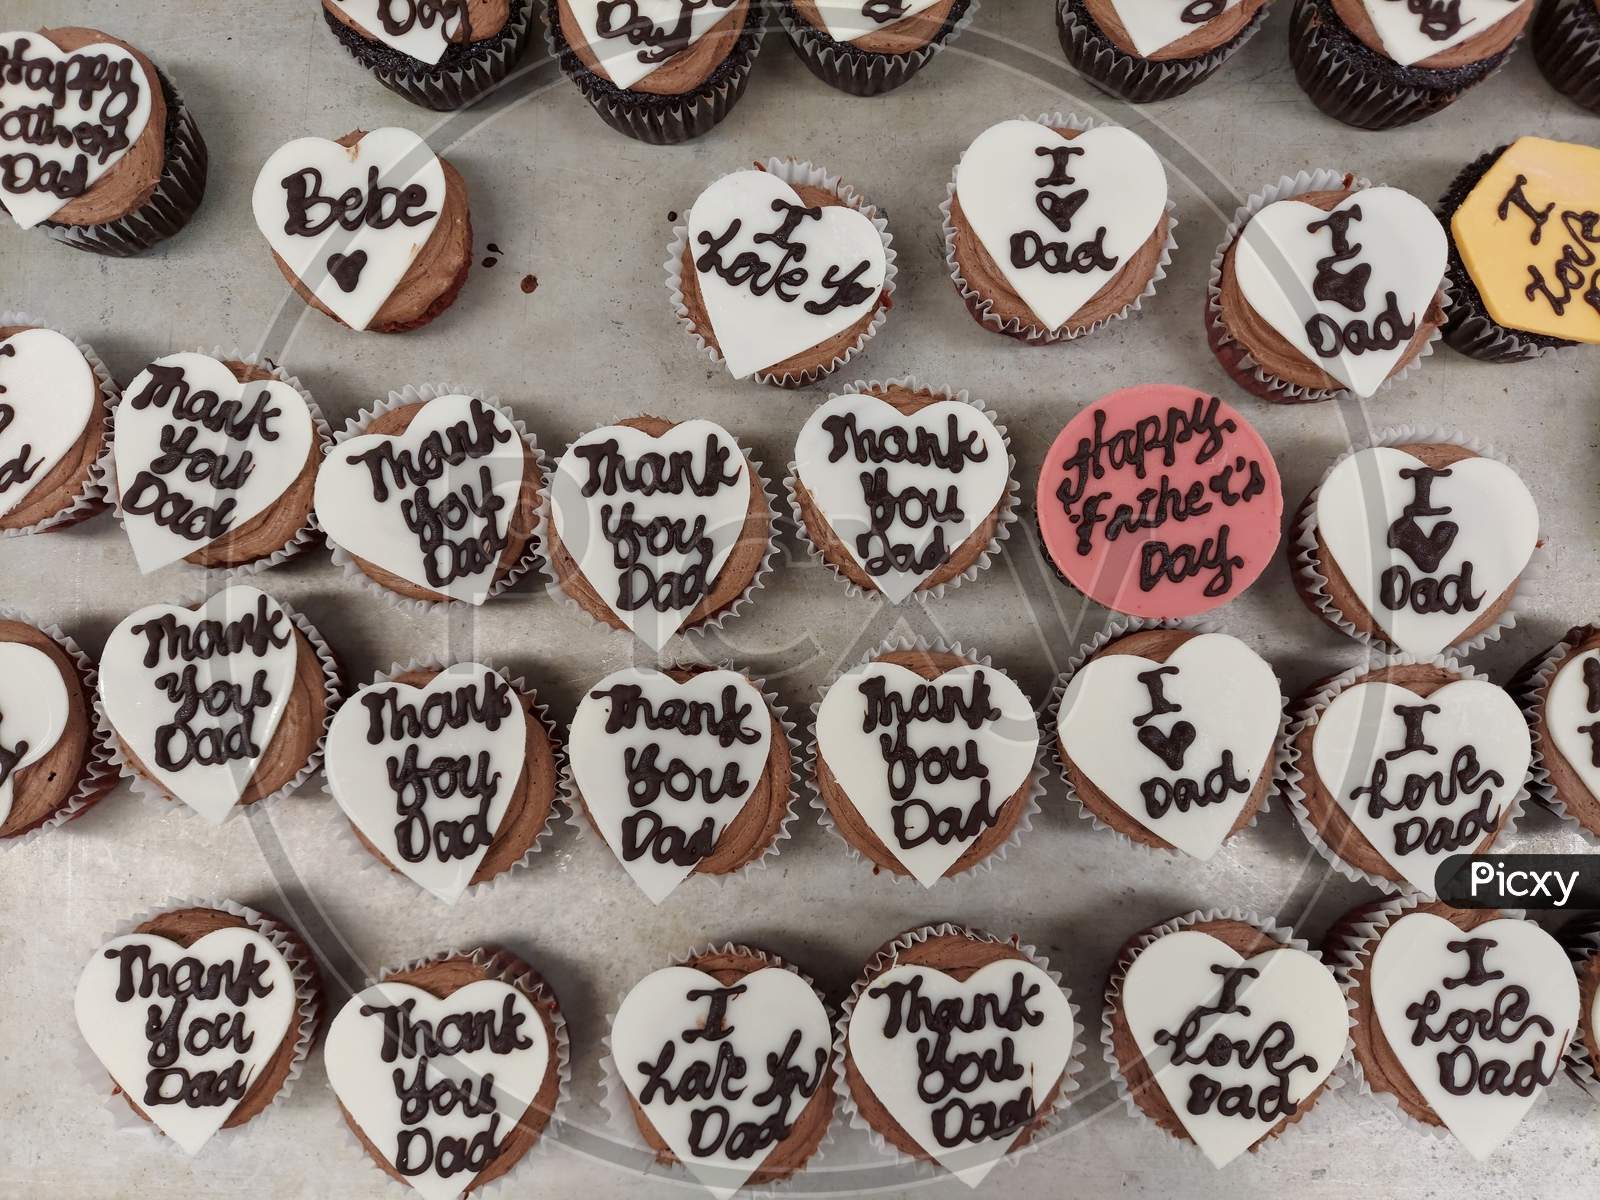 I Love Dad And Thank You Dad Writing On A White Colour Heart Shaped Chocolate Decoration On Top Of A Cupcake